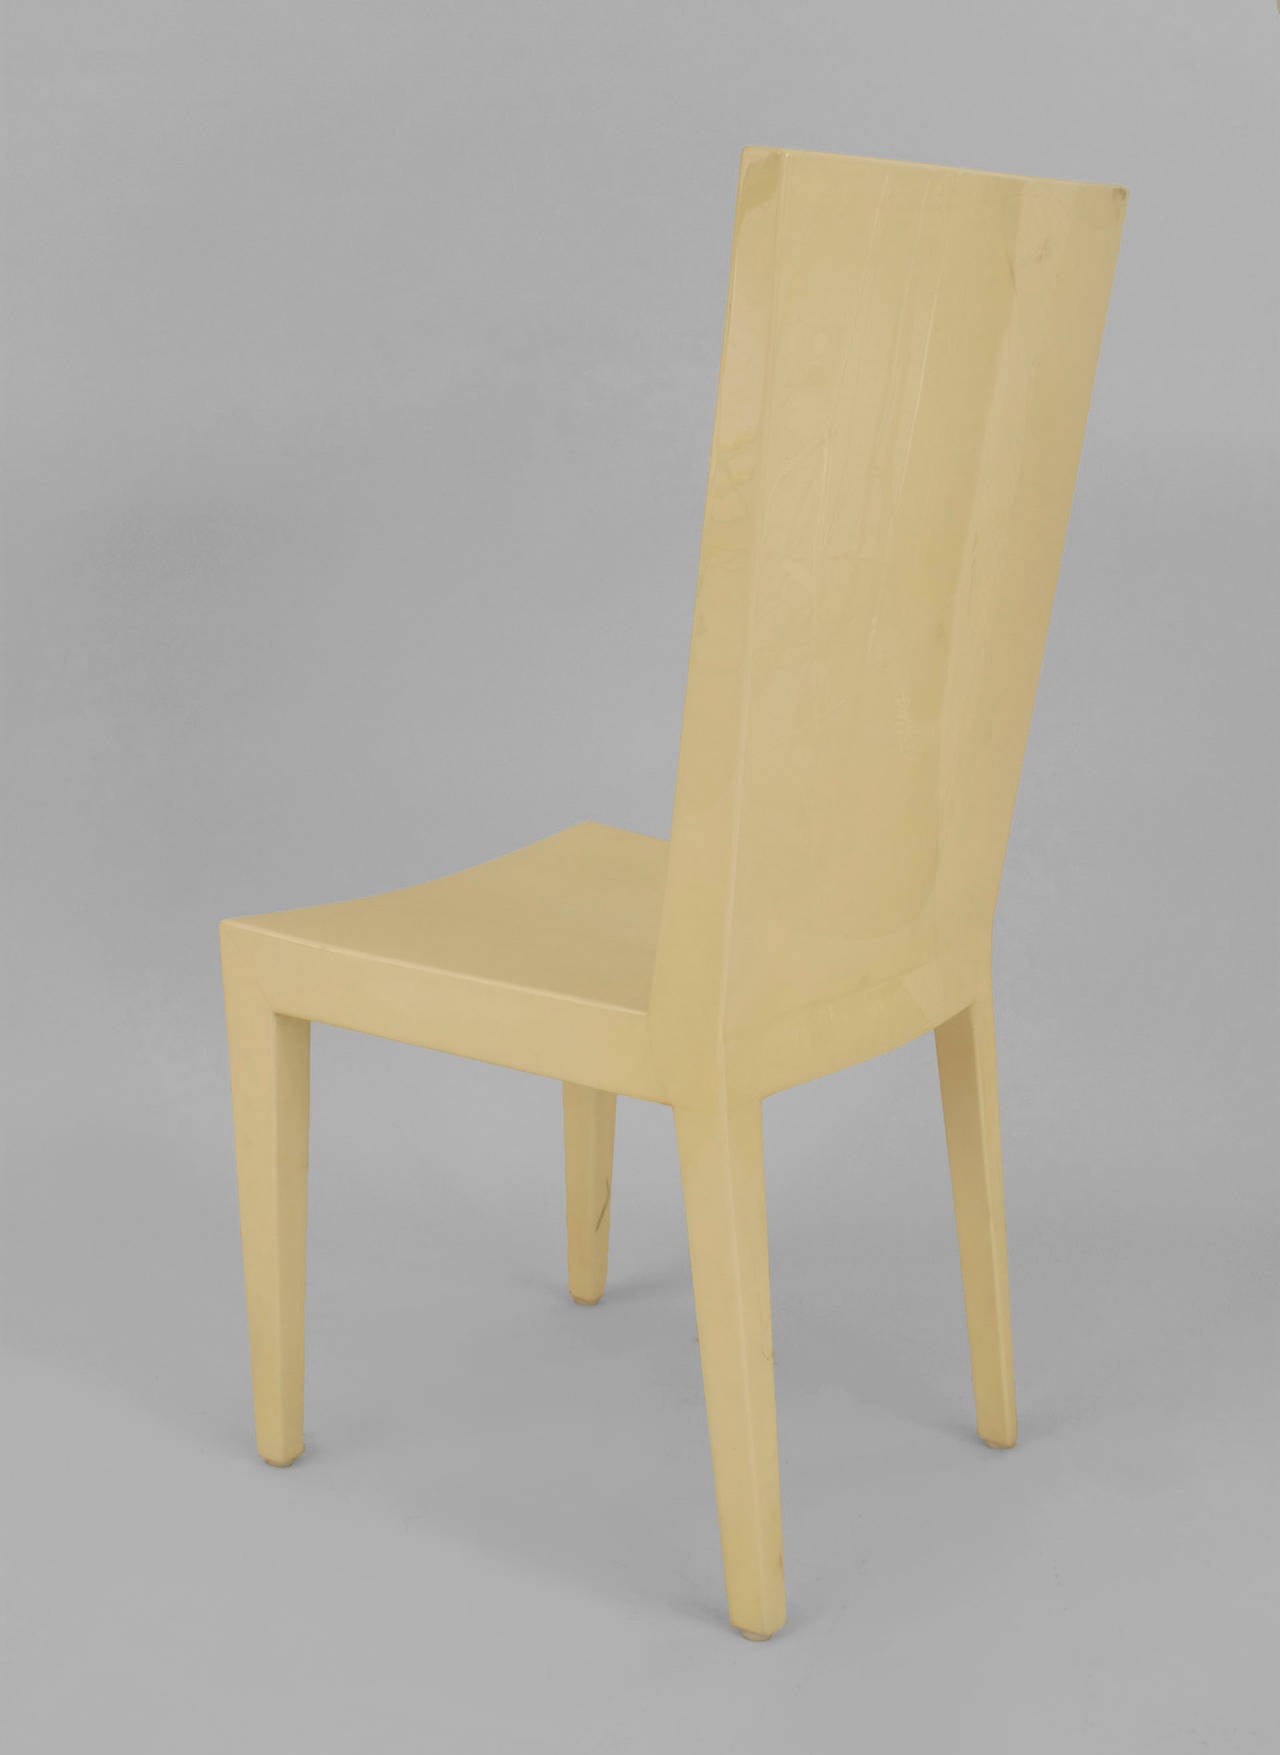 Set of 4 American Post-War Design (1980s) all parchment veneer side chairs with a simple geometric form (att: KARL SPRINGER)
